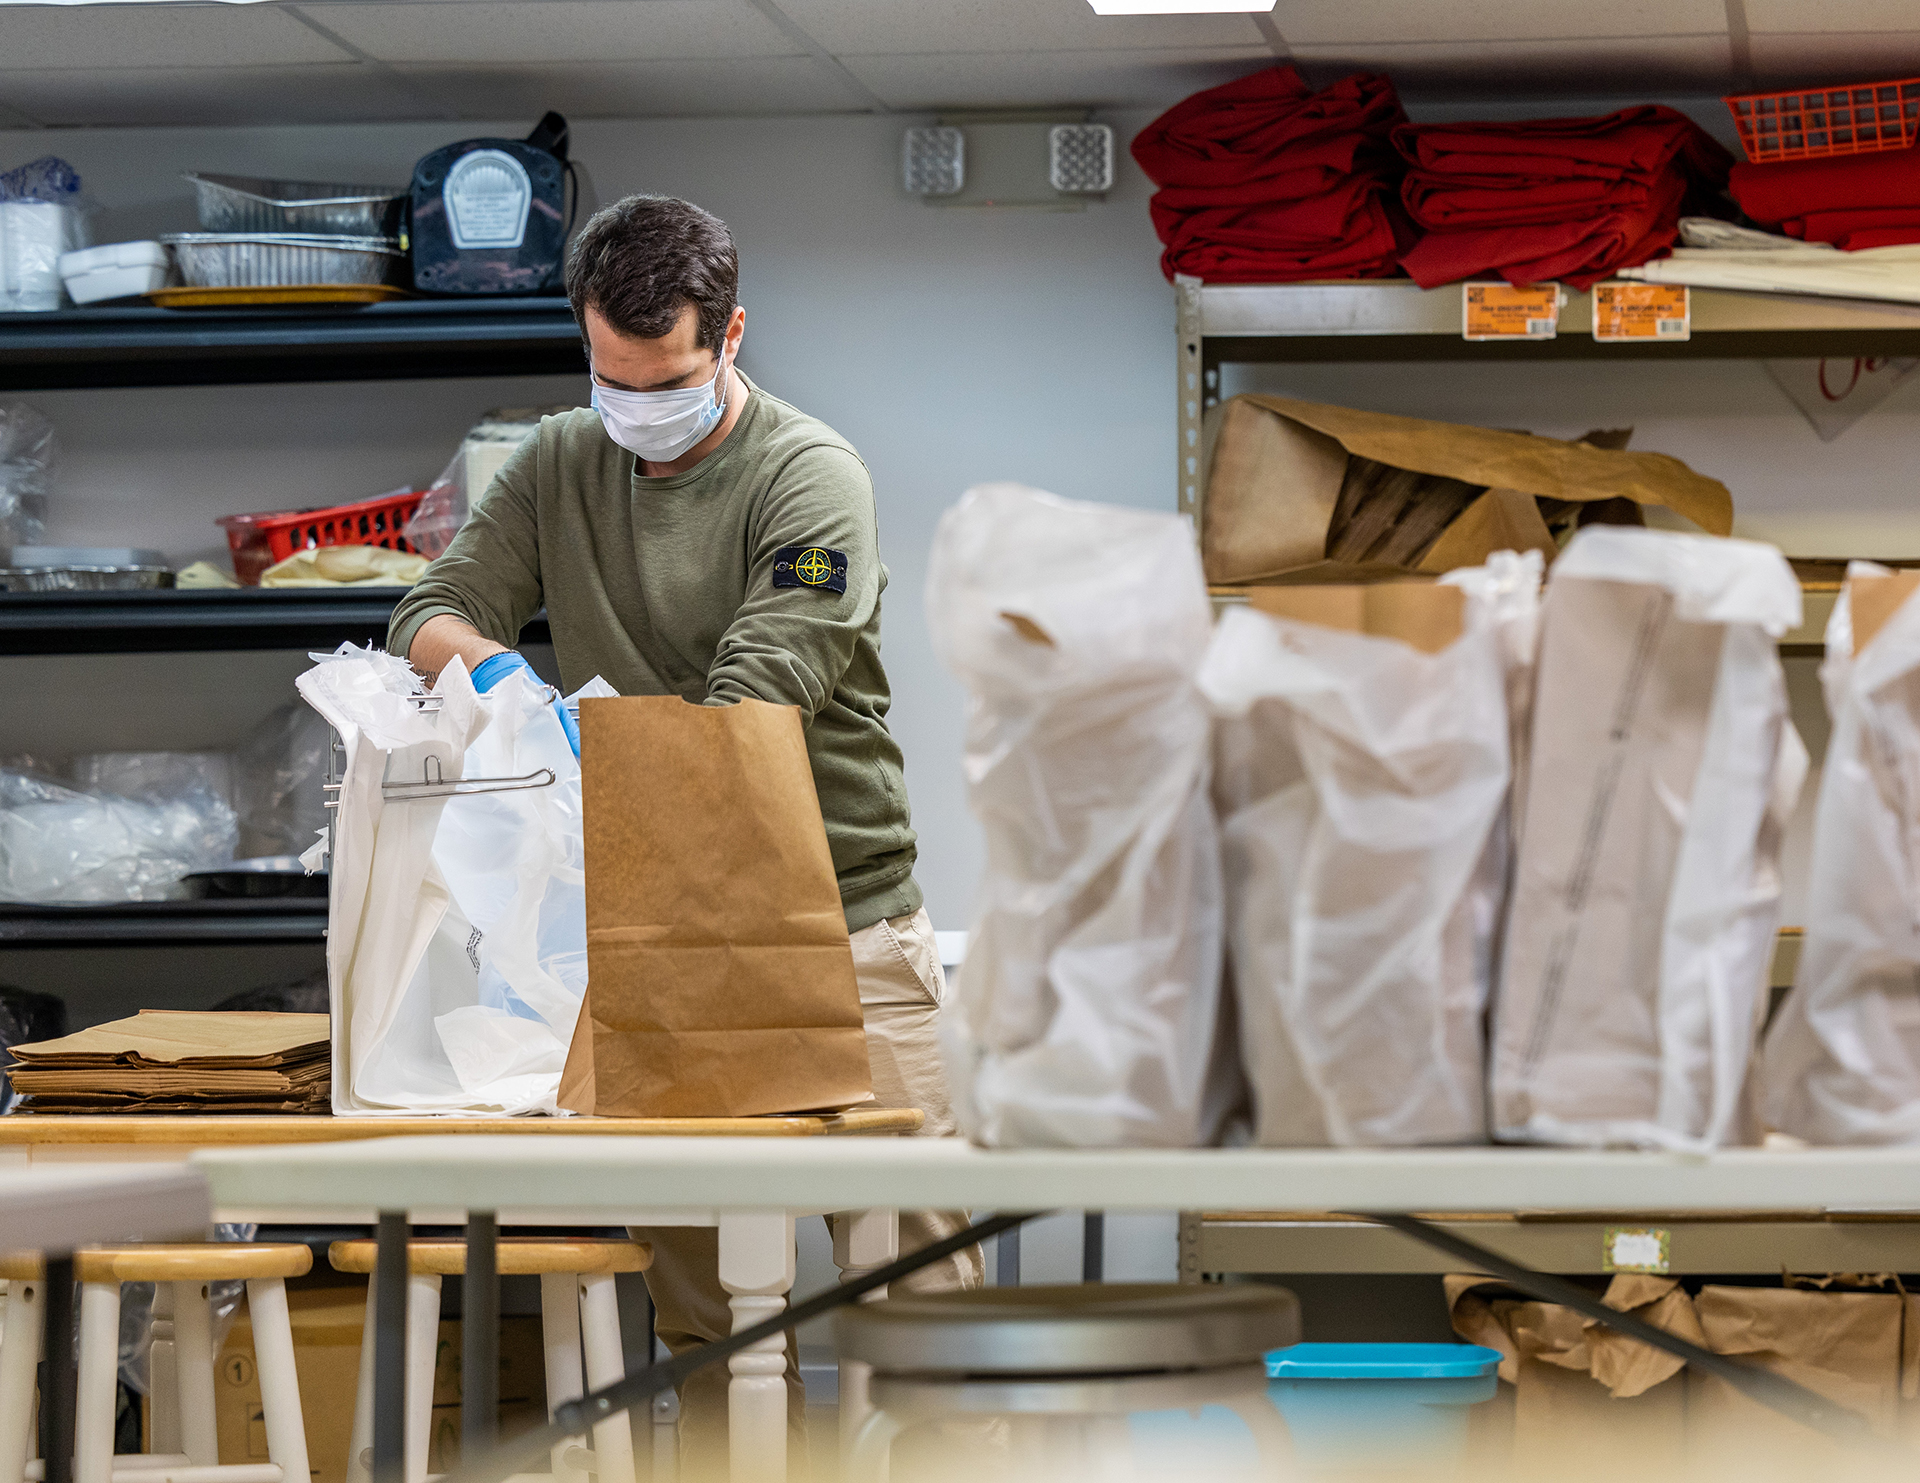 Local nonprofits, like Heart of the Hamptons, often need extra volunteers for the holiday season